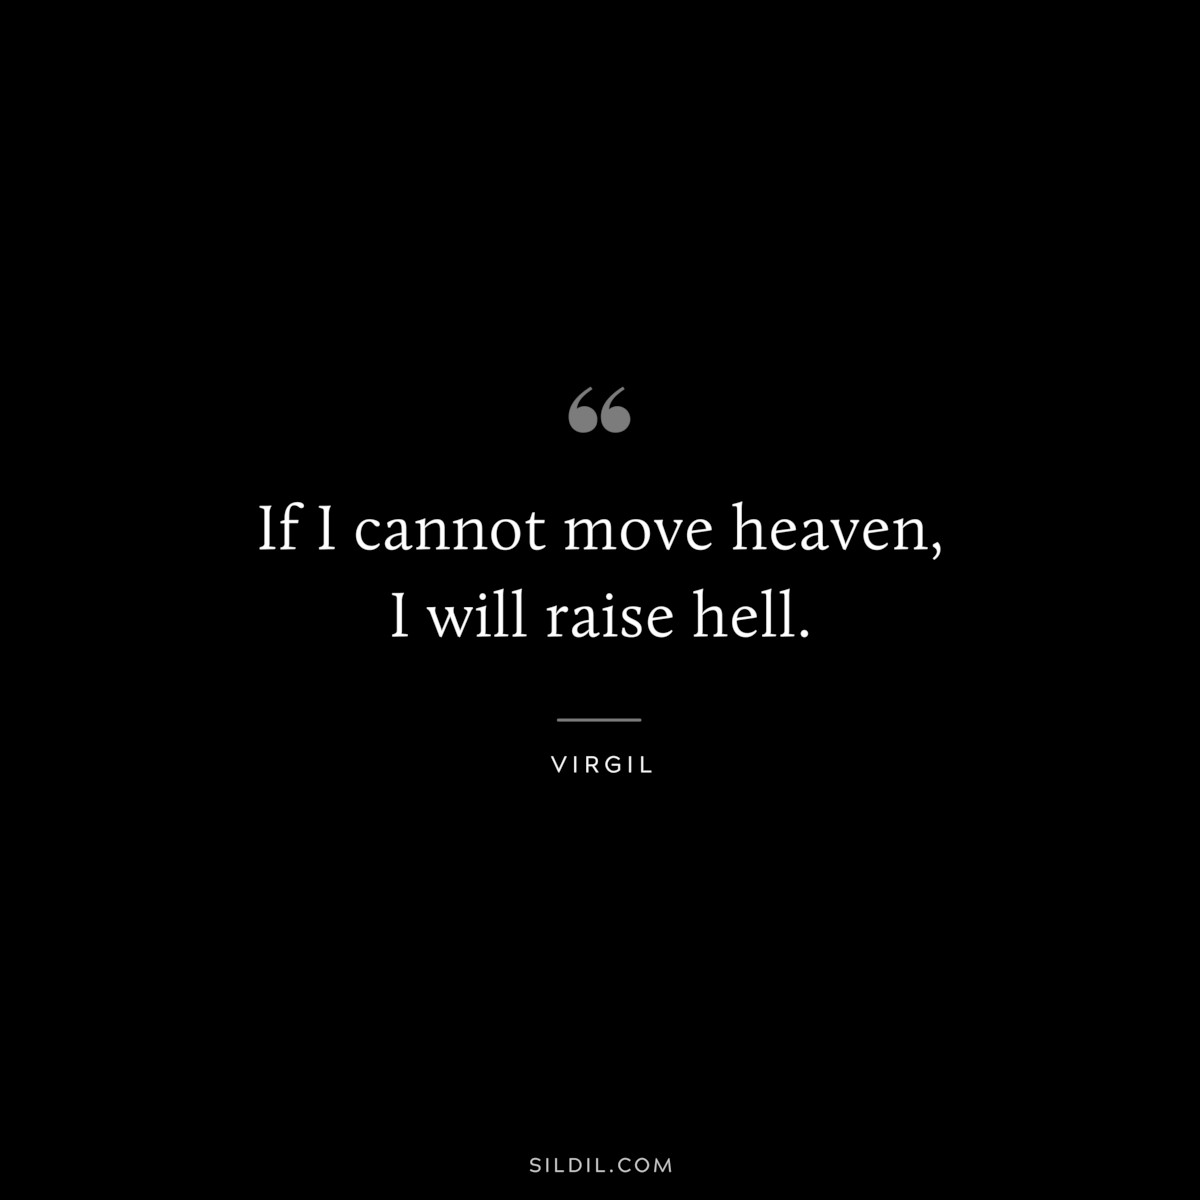 If I cannot move heaven, I will raise hell. ― Virgil